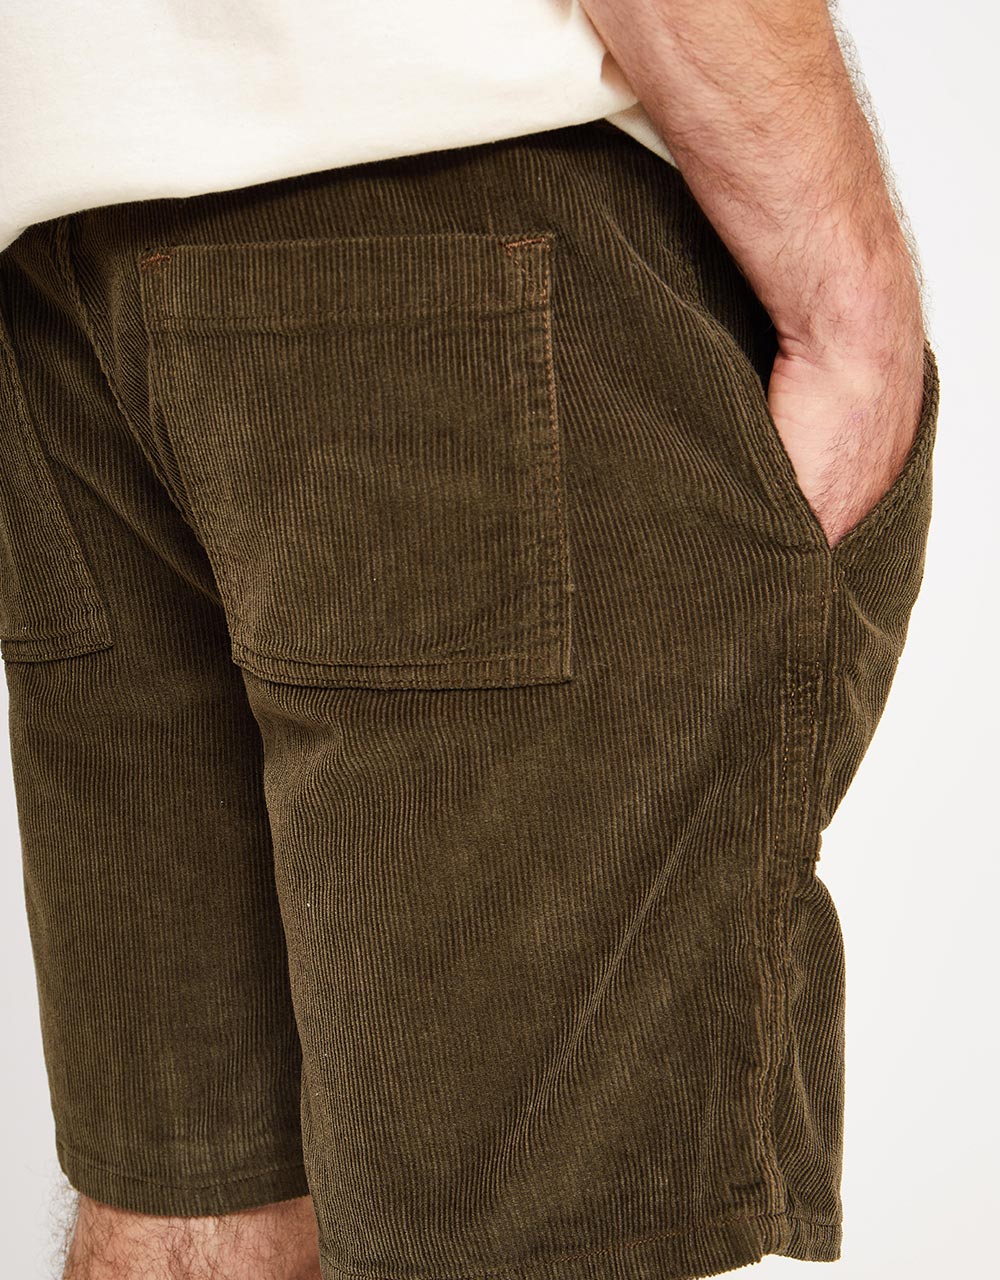 Route One Classic Cord Shorts - Olive